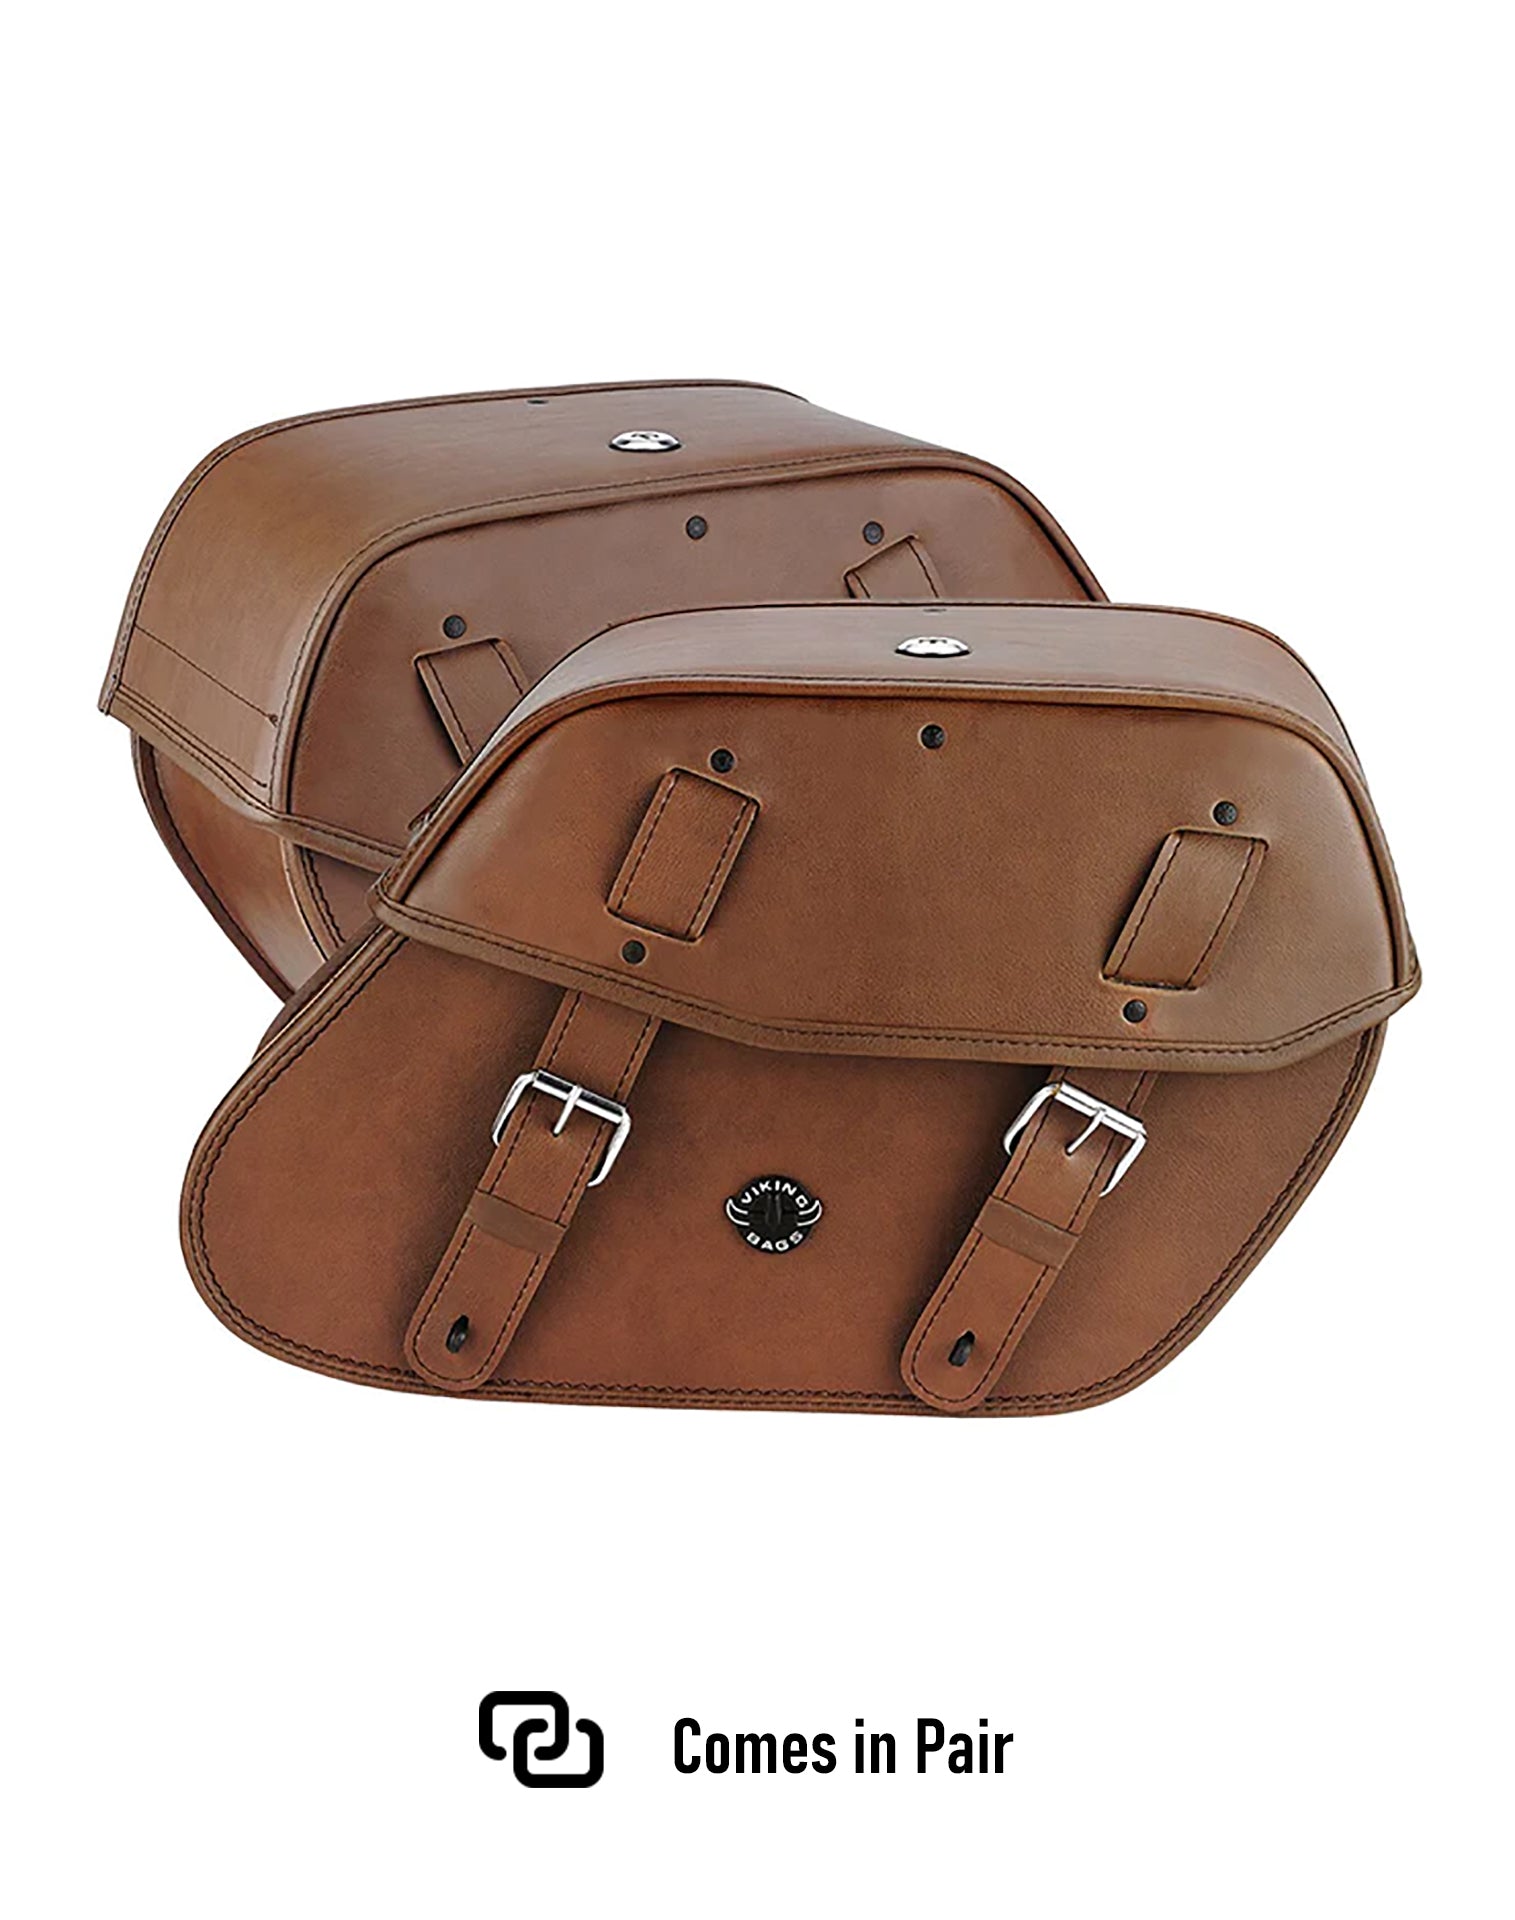 Viking Odin Brown Large Yamaha Stratoliner Xv 1900 Leather Motorcycle Saddlebags Weather Resistant Bags Comes in Pair